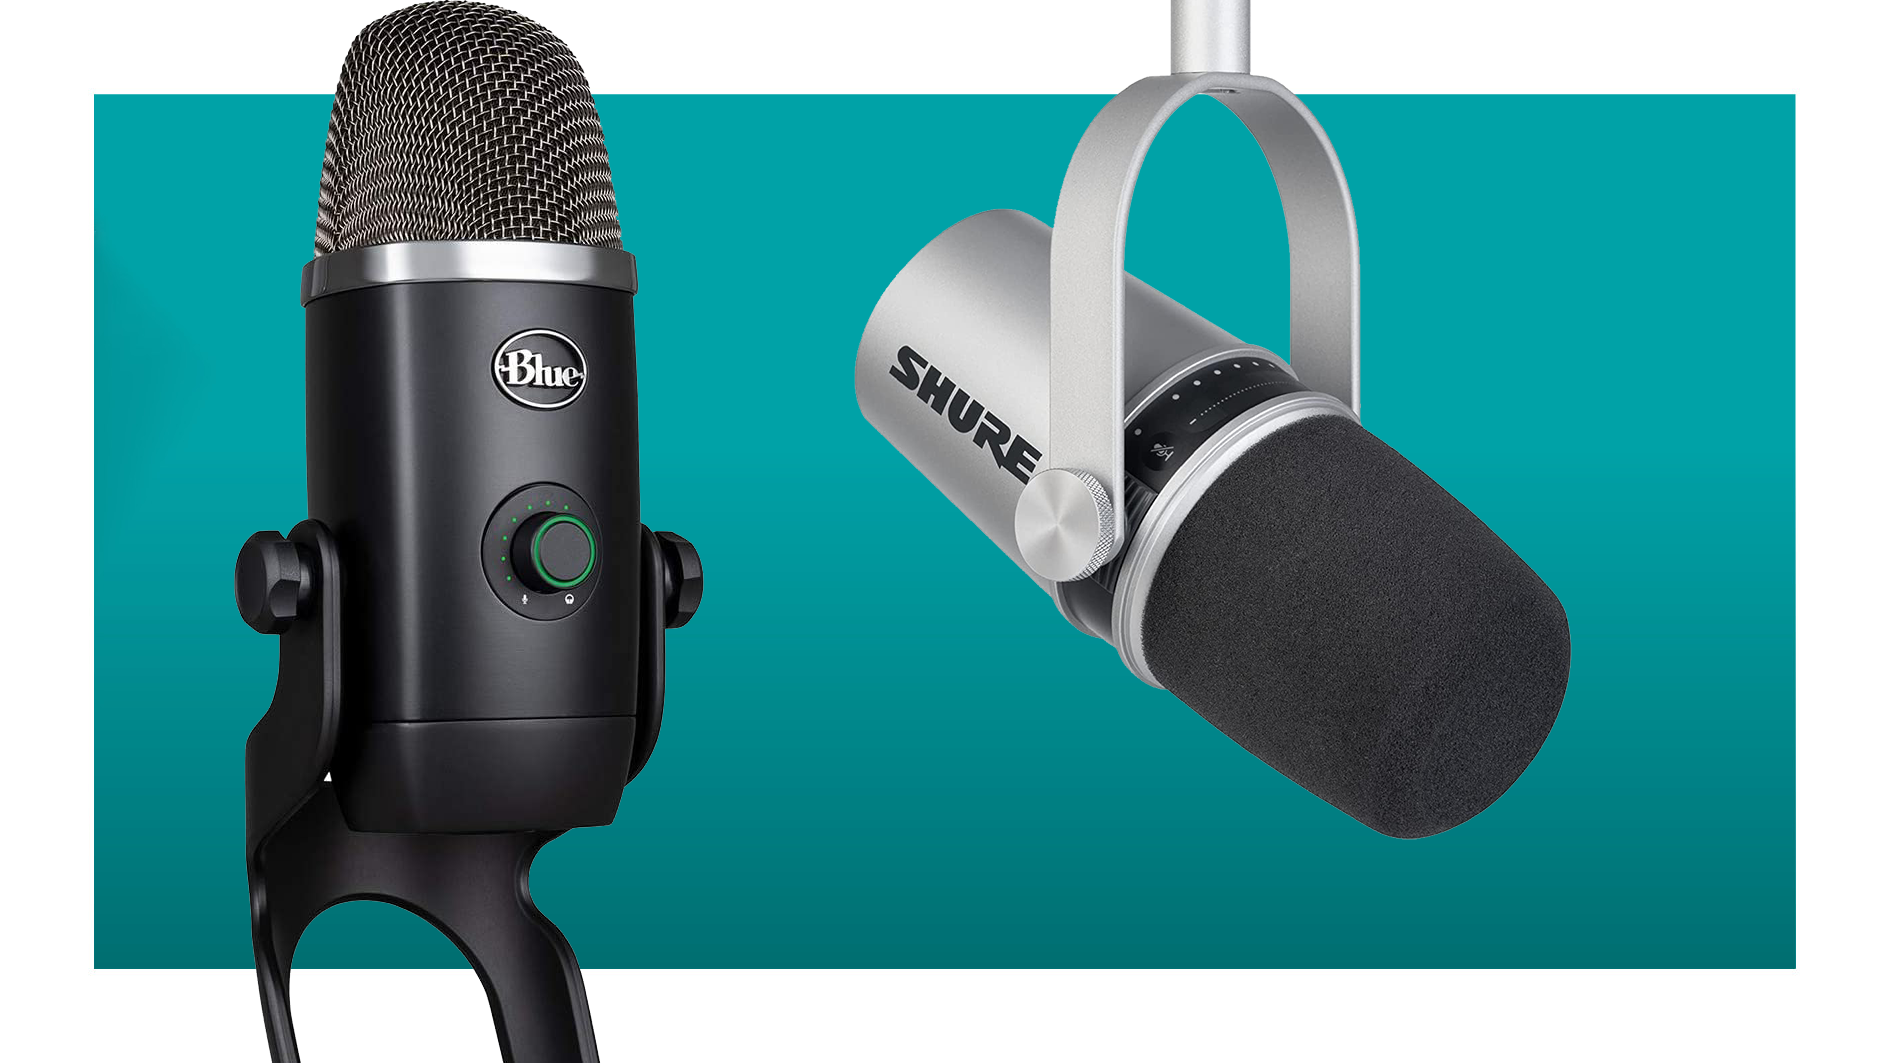 TONOR TC-777 Microphone – A Well Priced Budget Desktop Microphone